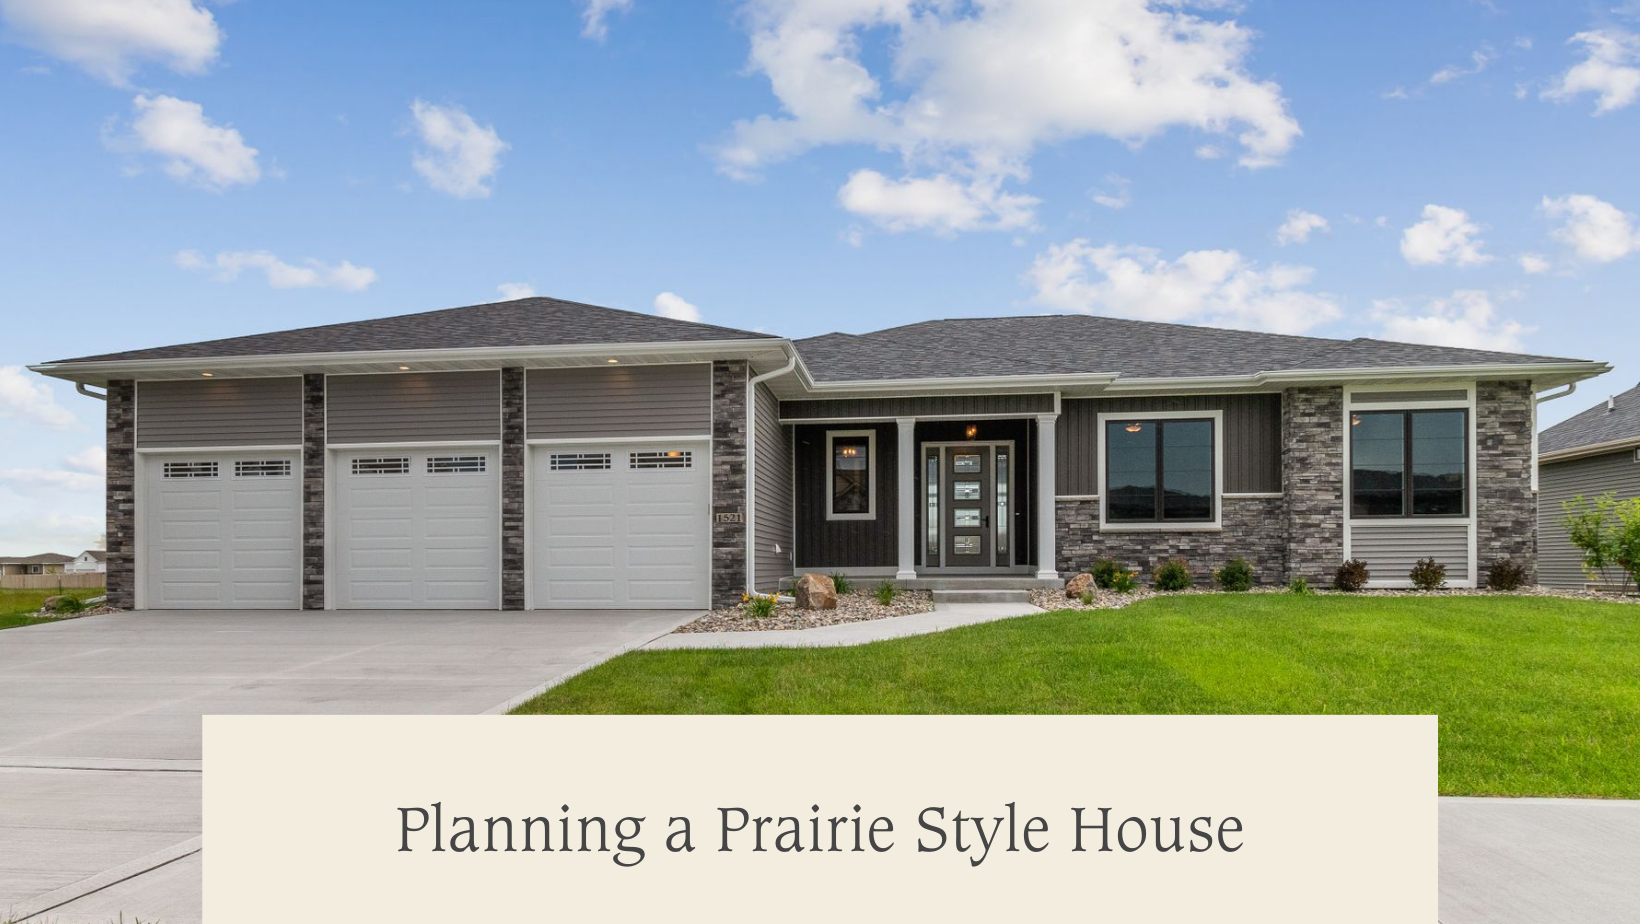 Planning a Prairie Style House